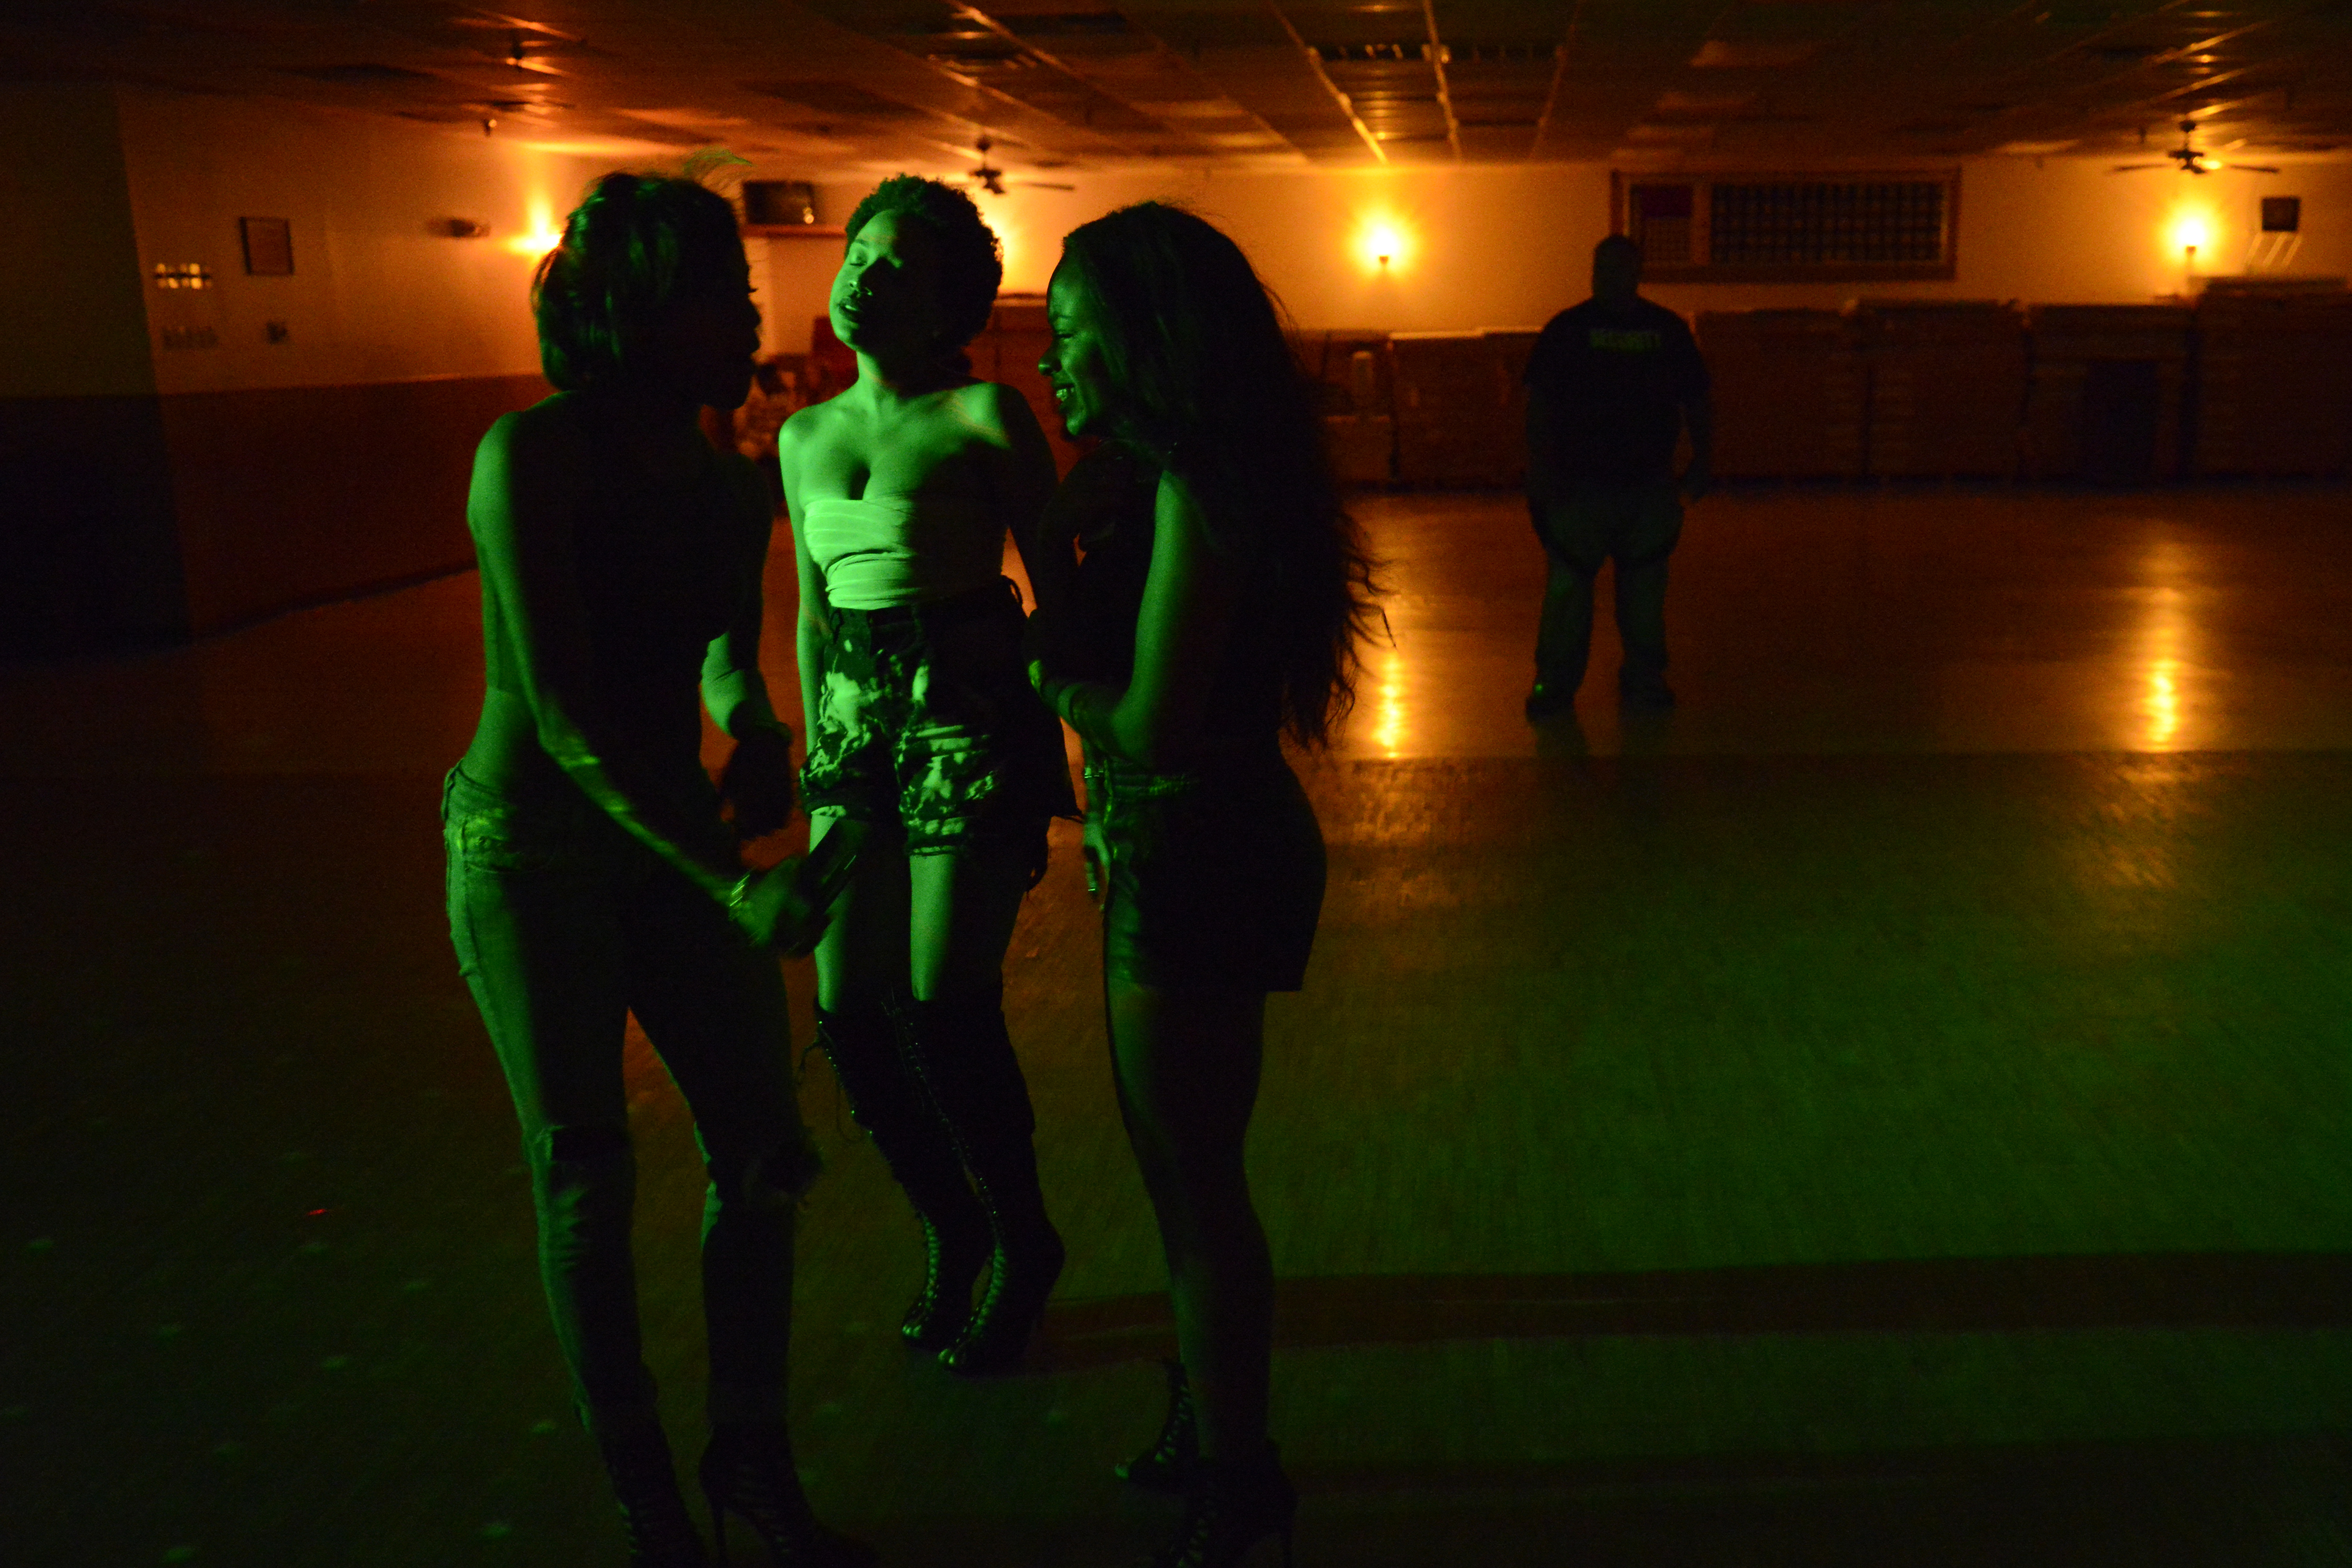 Students dance at the 'Eskapade' homecoming after party, hosted by the University of Missouri's Kappa Alpha Psi and Sigma Gamma Rho Friday night during Black Homecoming on Oct. 9, 2015 in Columbia, Mo. The alternative homecoming was created in response to a social divide at the university. The first Black Homecoming was held in 1988.